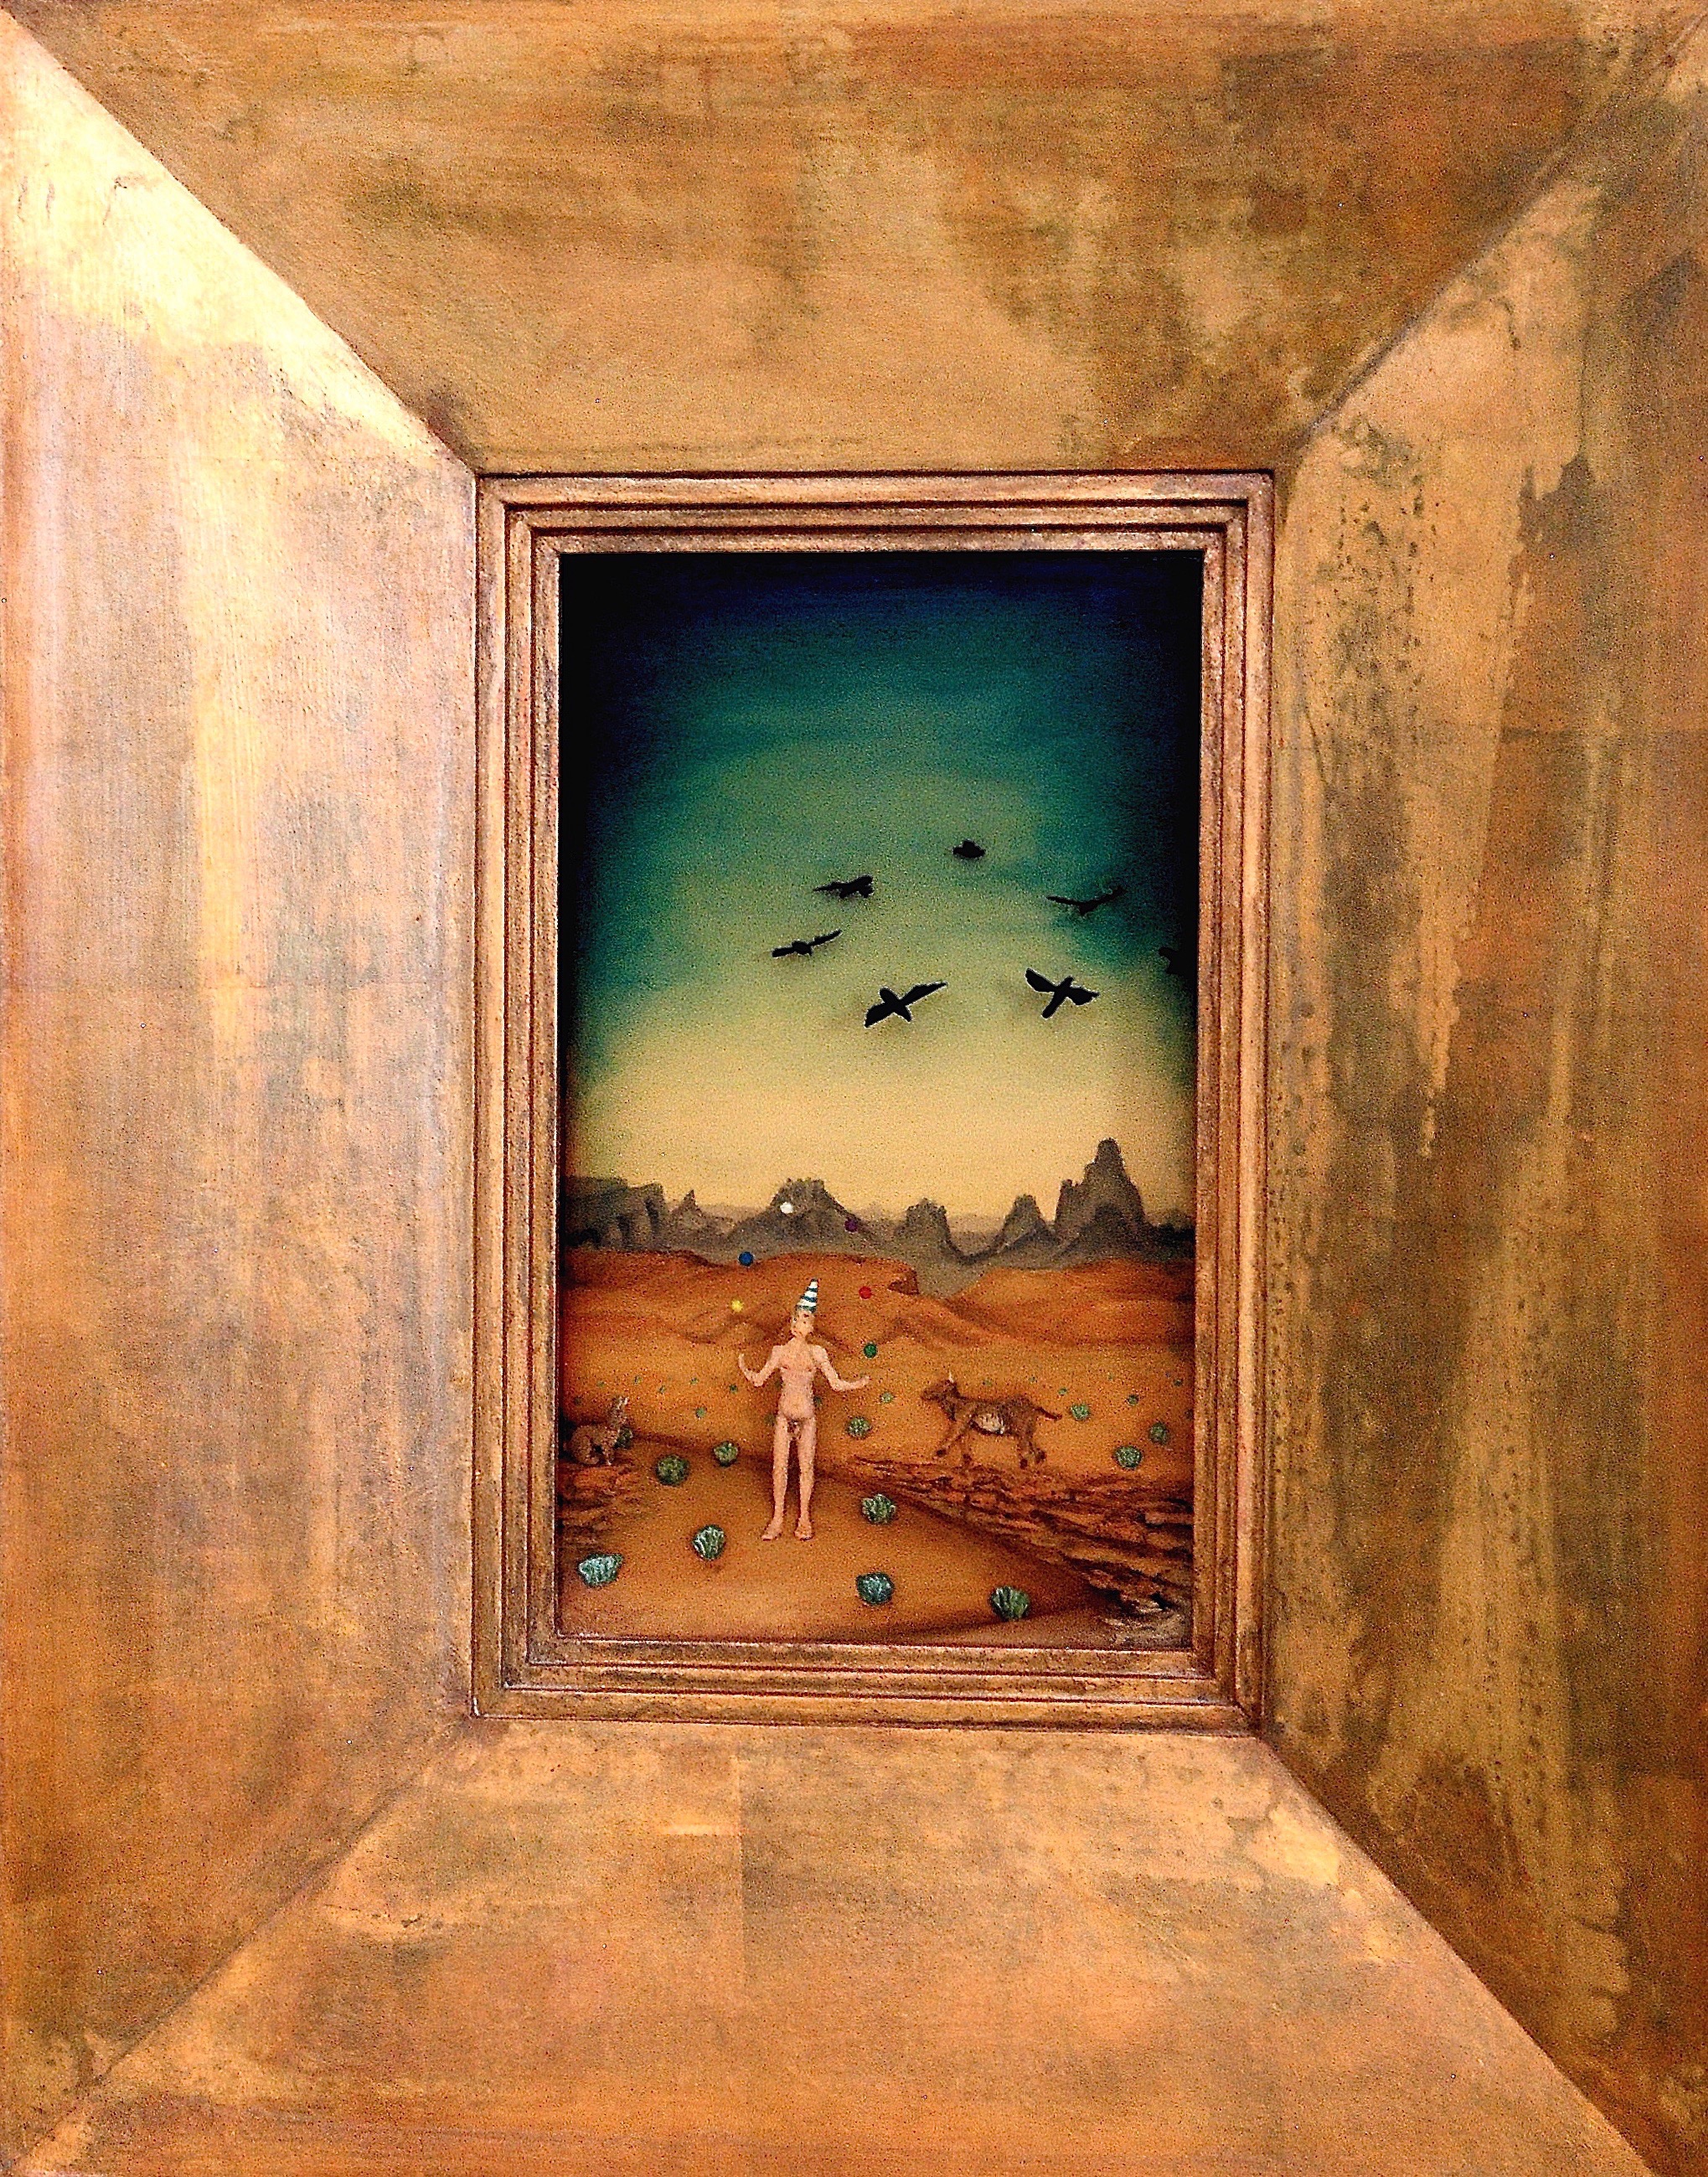 Thomas Coffin - The Quick and the Dead, 12"h x 7"w x 2"d, mixed media 3-d diorama encased in acrylic resin, handmade wood frame, copper leaf